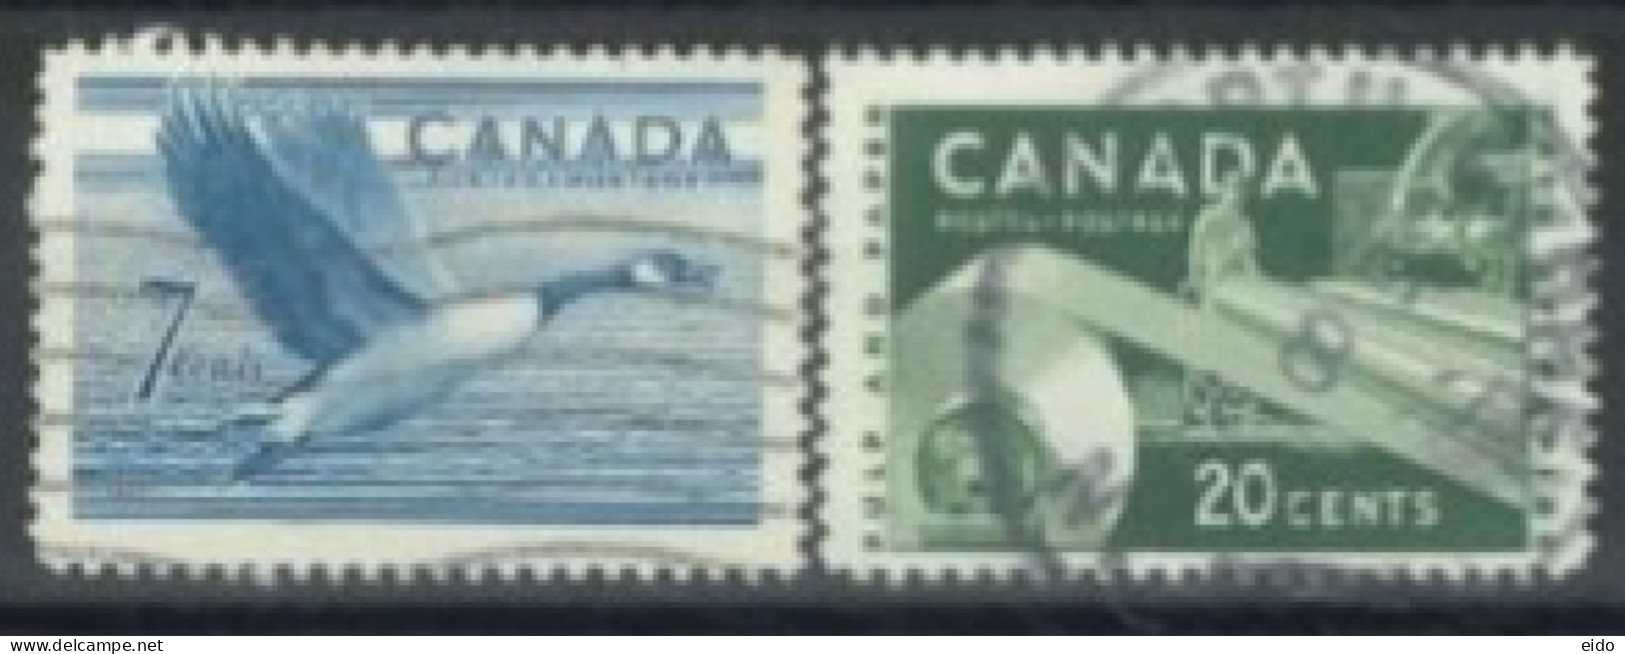 CANADA - 1952/53, CANADIAN GOOSE & PULP & PAPER INDUSTRY. STAMPS SET OF 2, USED. - Usados